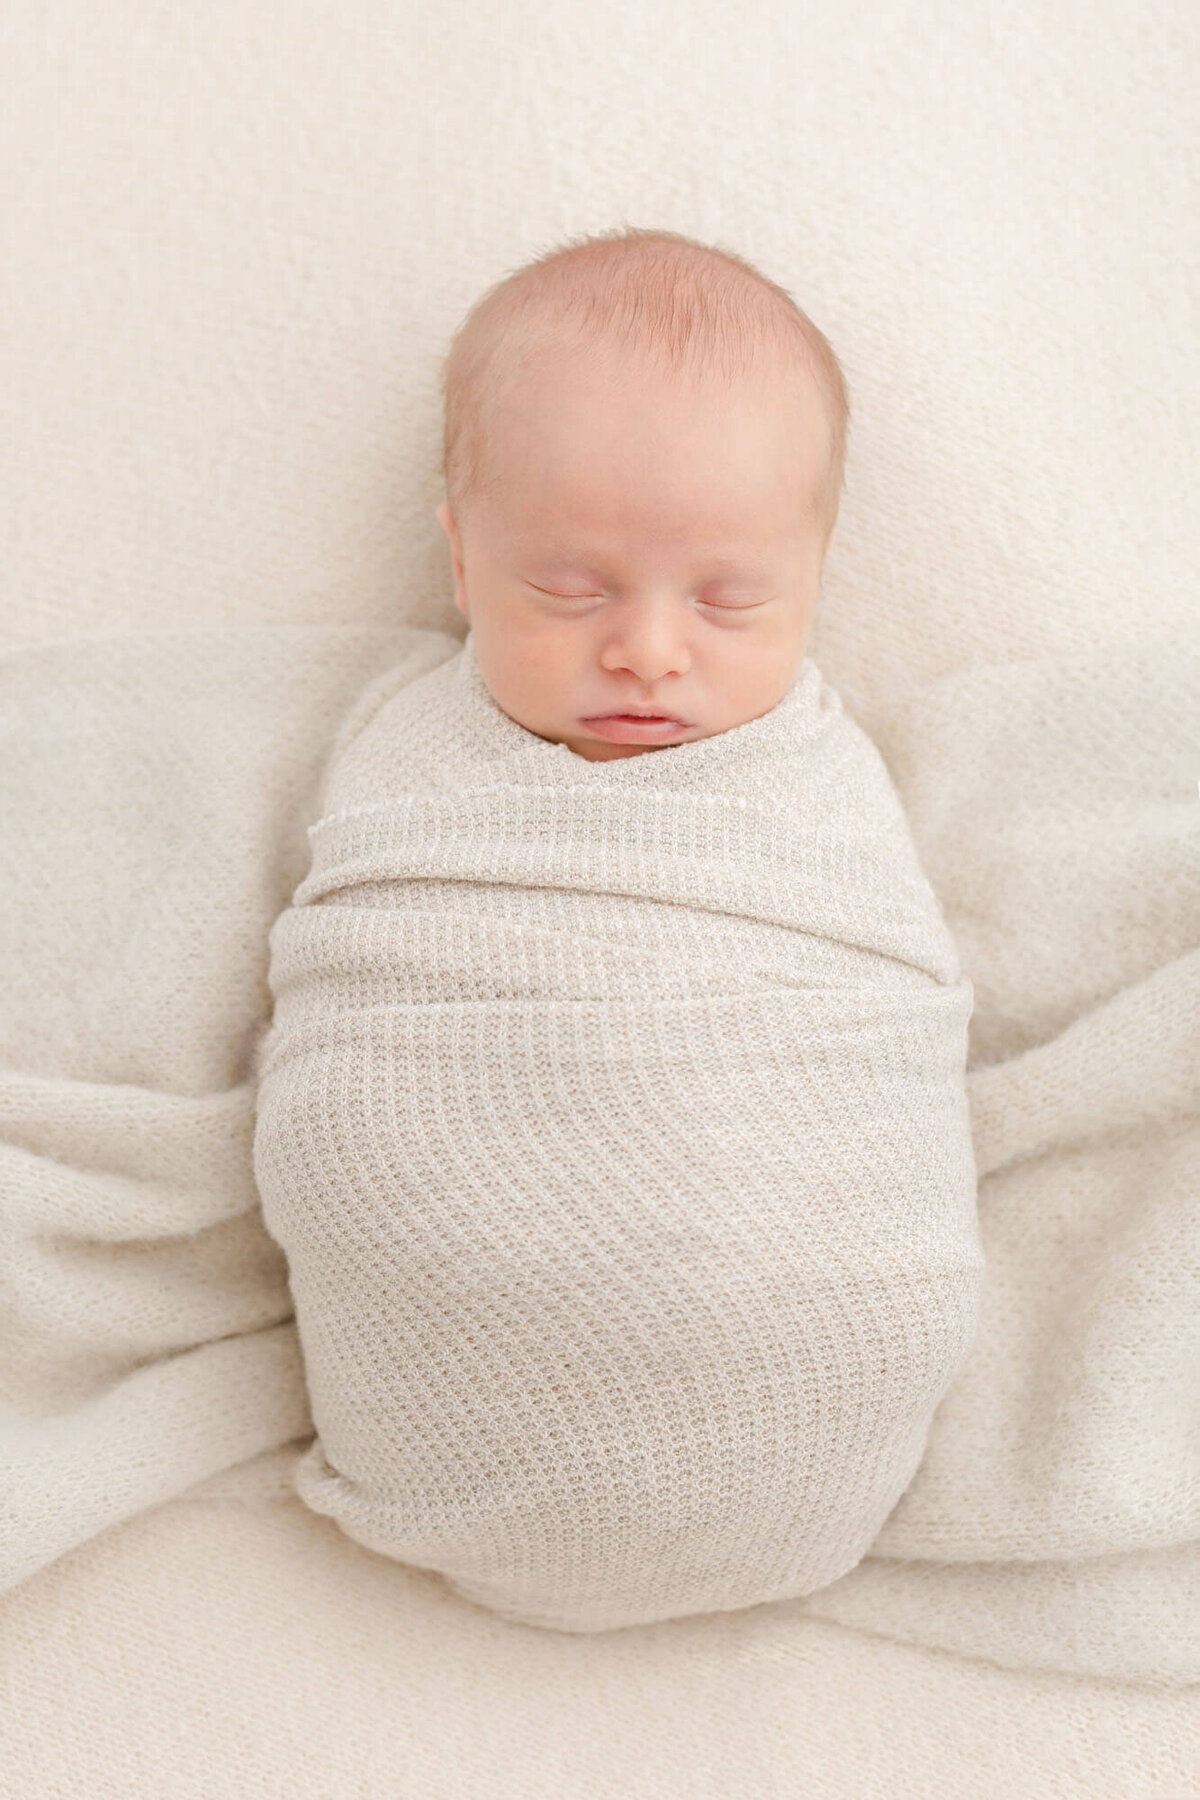 Light-skinned baby wrapped in beige textured cloth and sleeping on a cozy beige blanket. Baby is sleeping peacefully on his back.